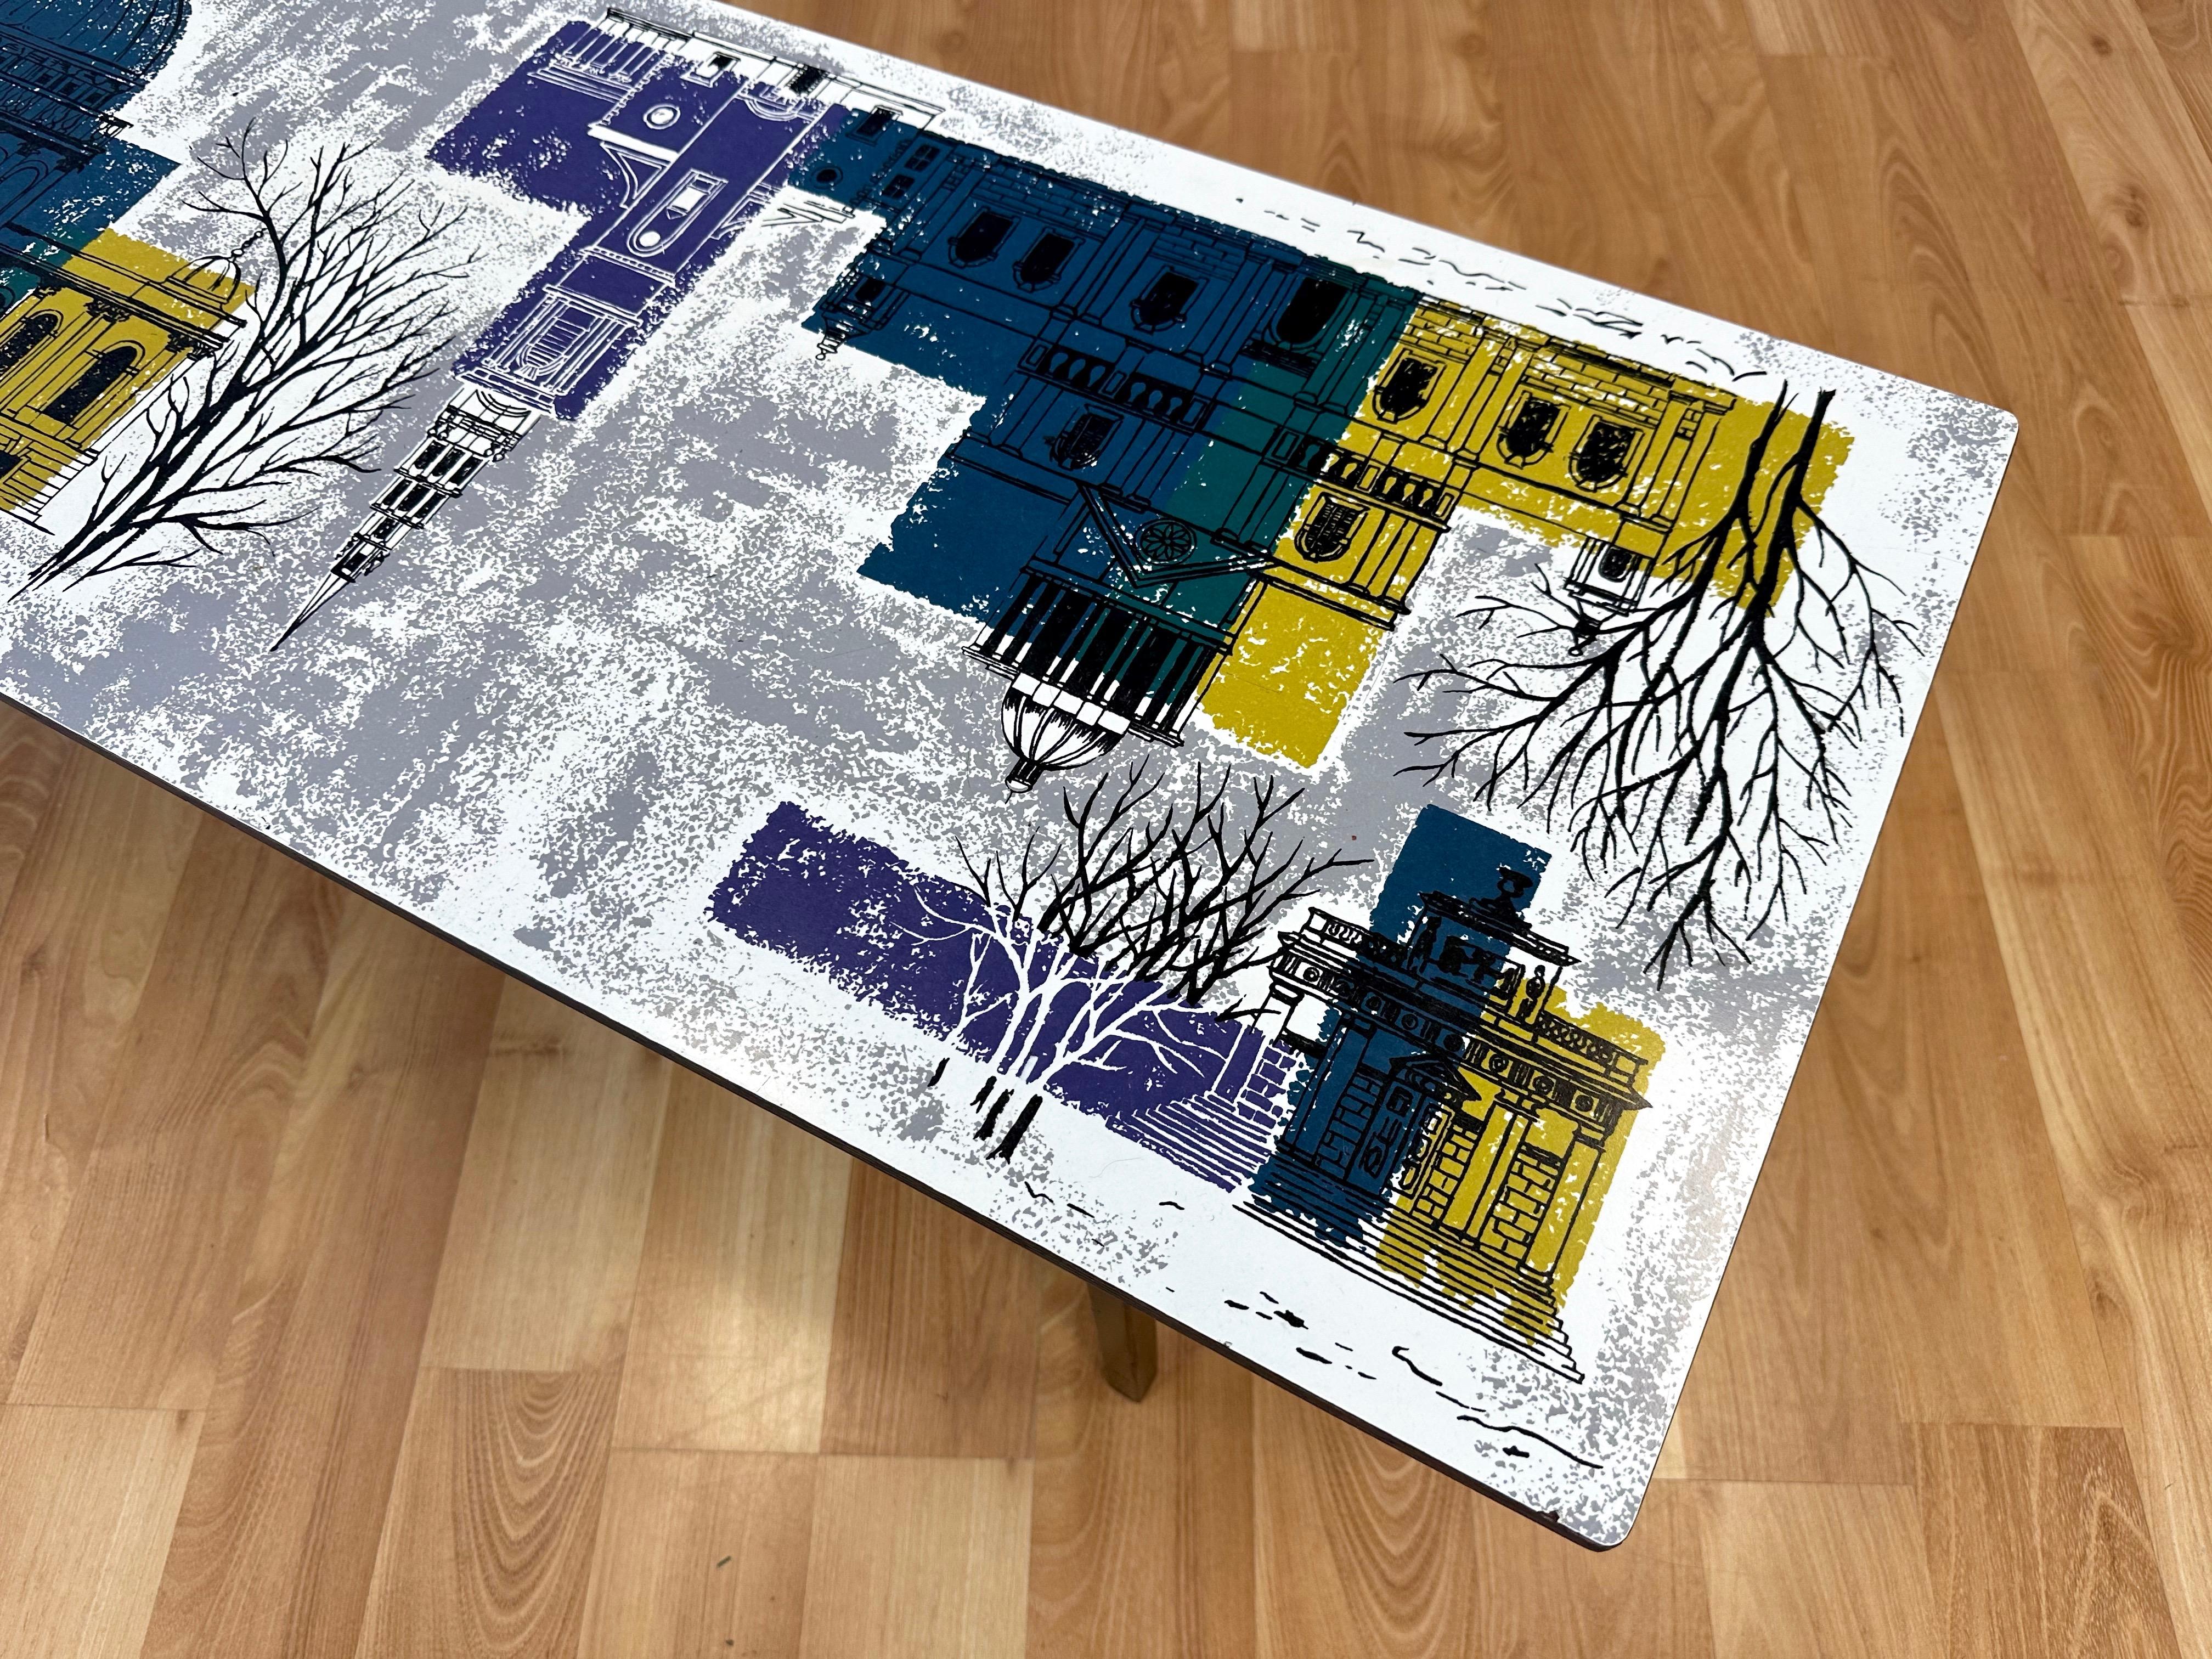 John Piper London Skyline Coffee Table by Myer for Conran and Heal’s, c. 1960 For Sale 10